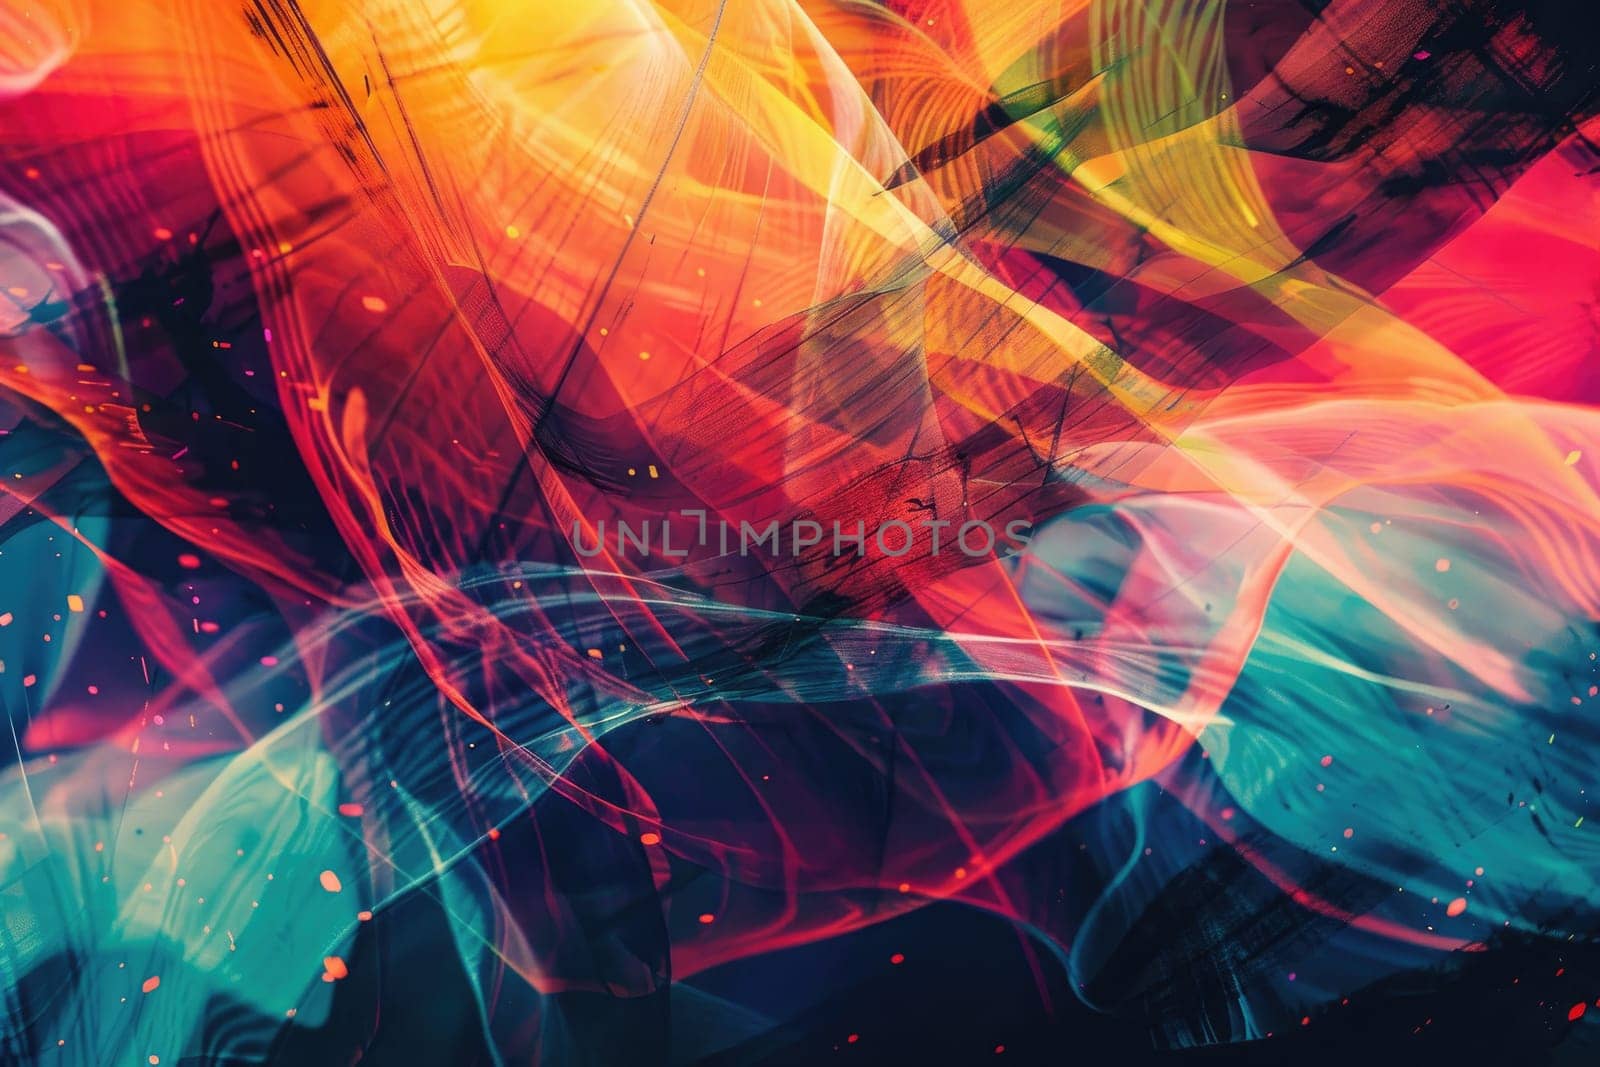 futuristic digital display vibrant abstract art, adding a pop of color with dynamic visual effects